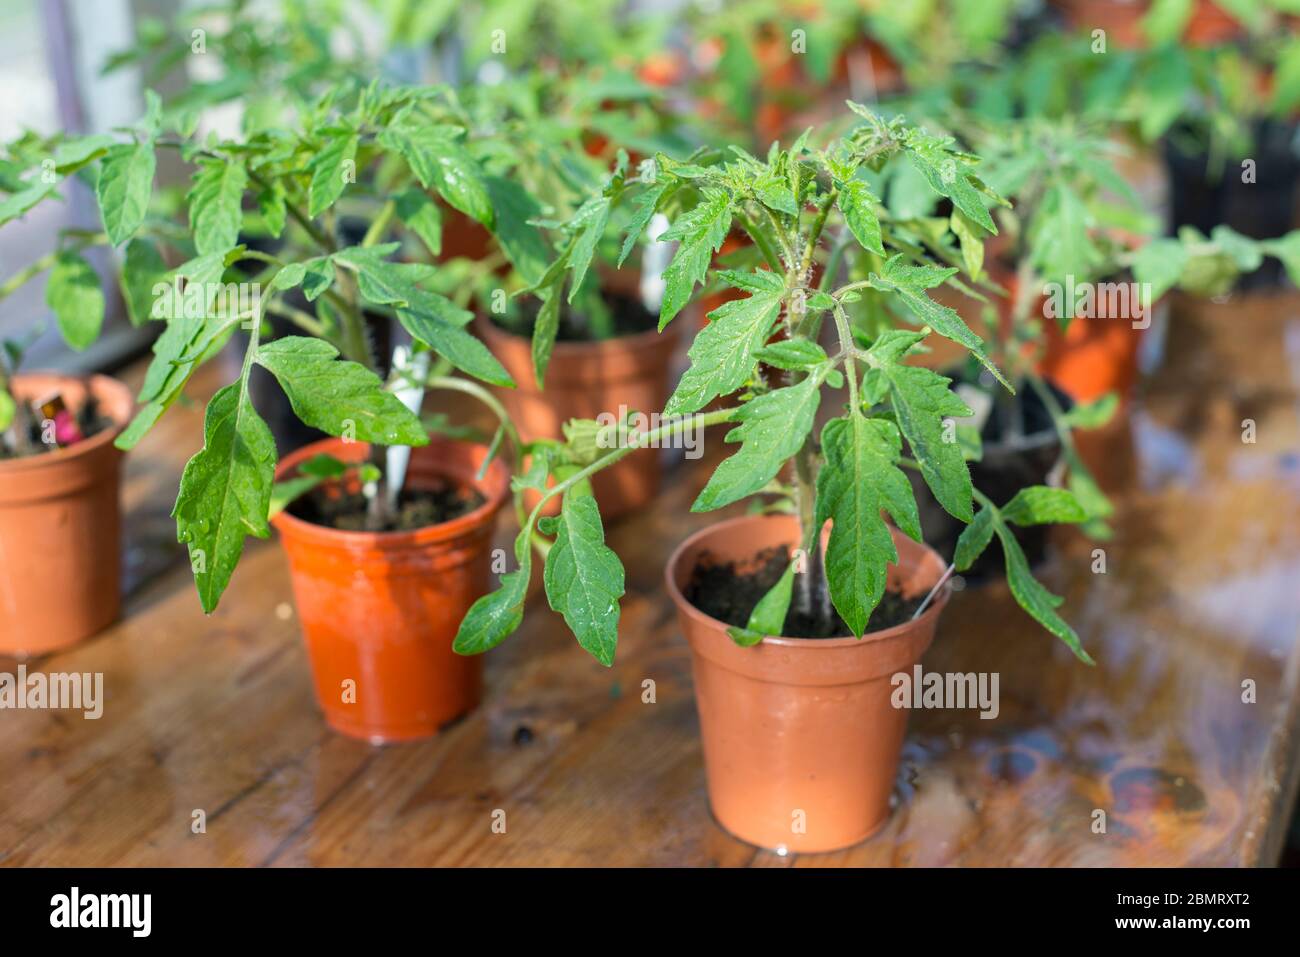 Young tomato plants in pots under glass Stock Photo